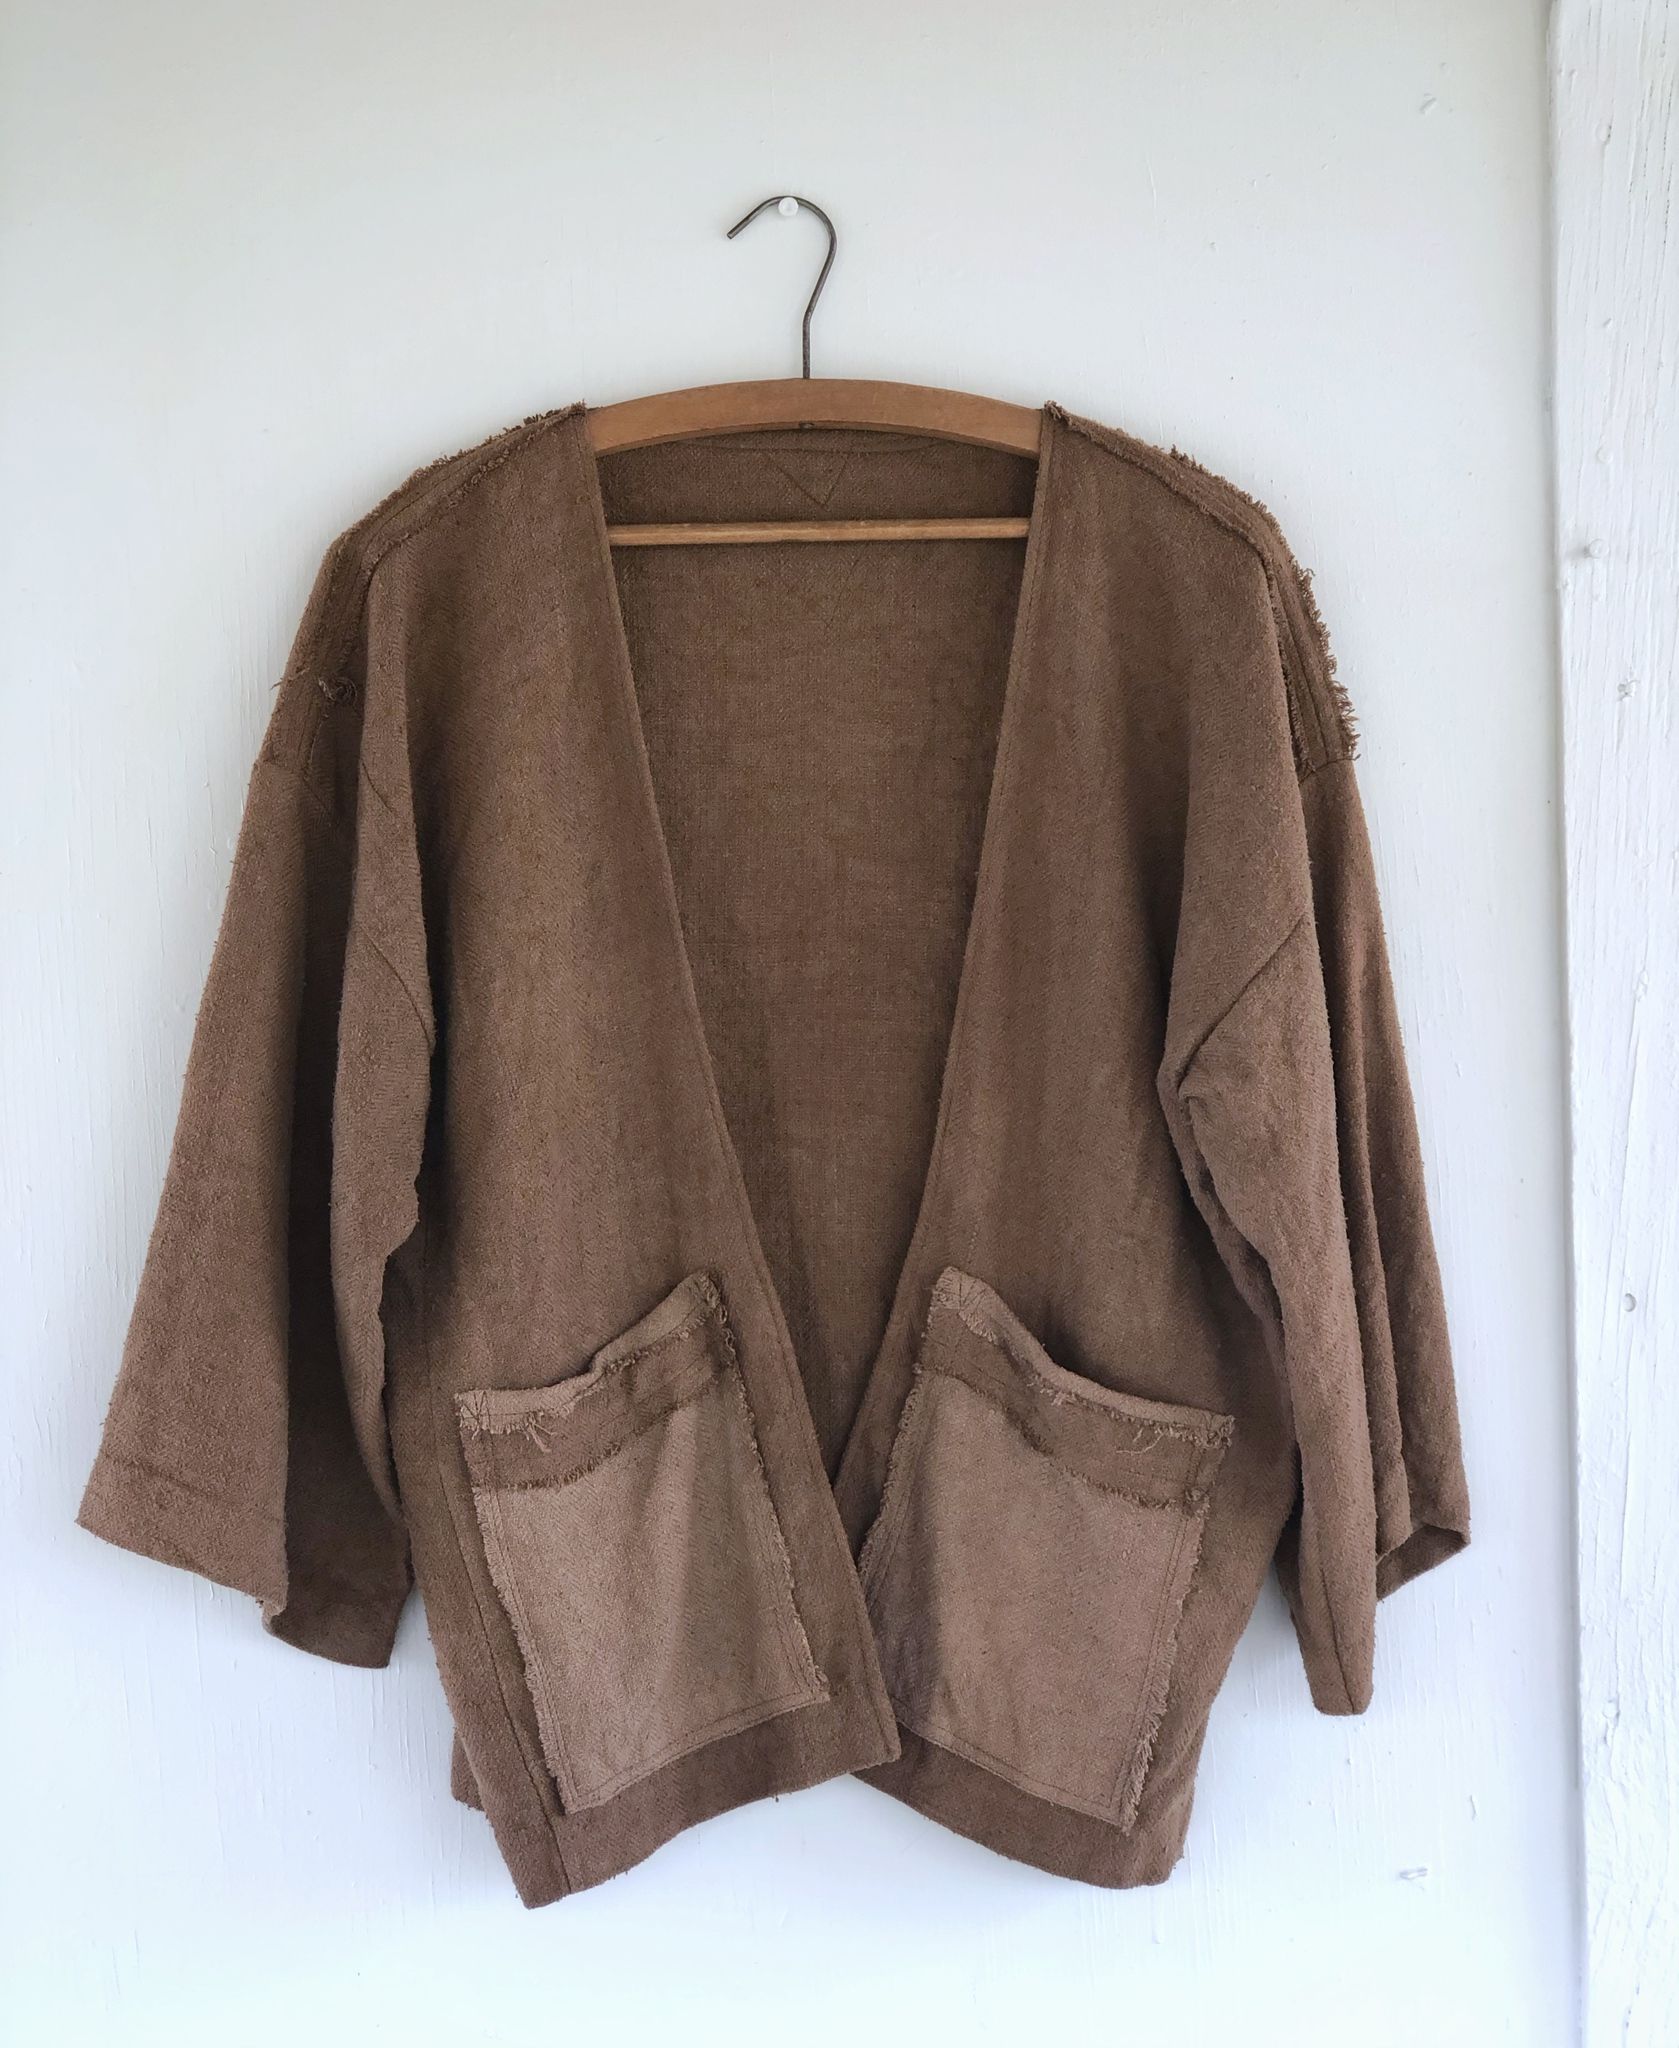 detail of handmade brown jacket with large pockets hanging on a hanger